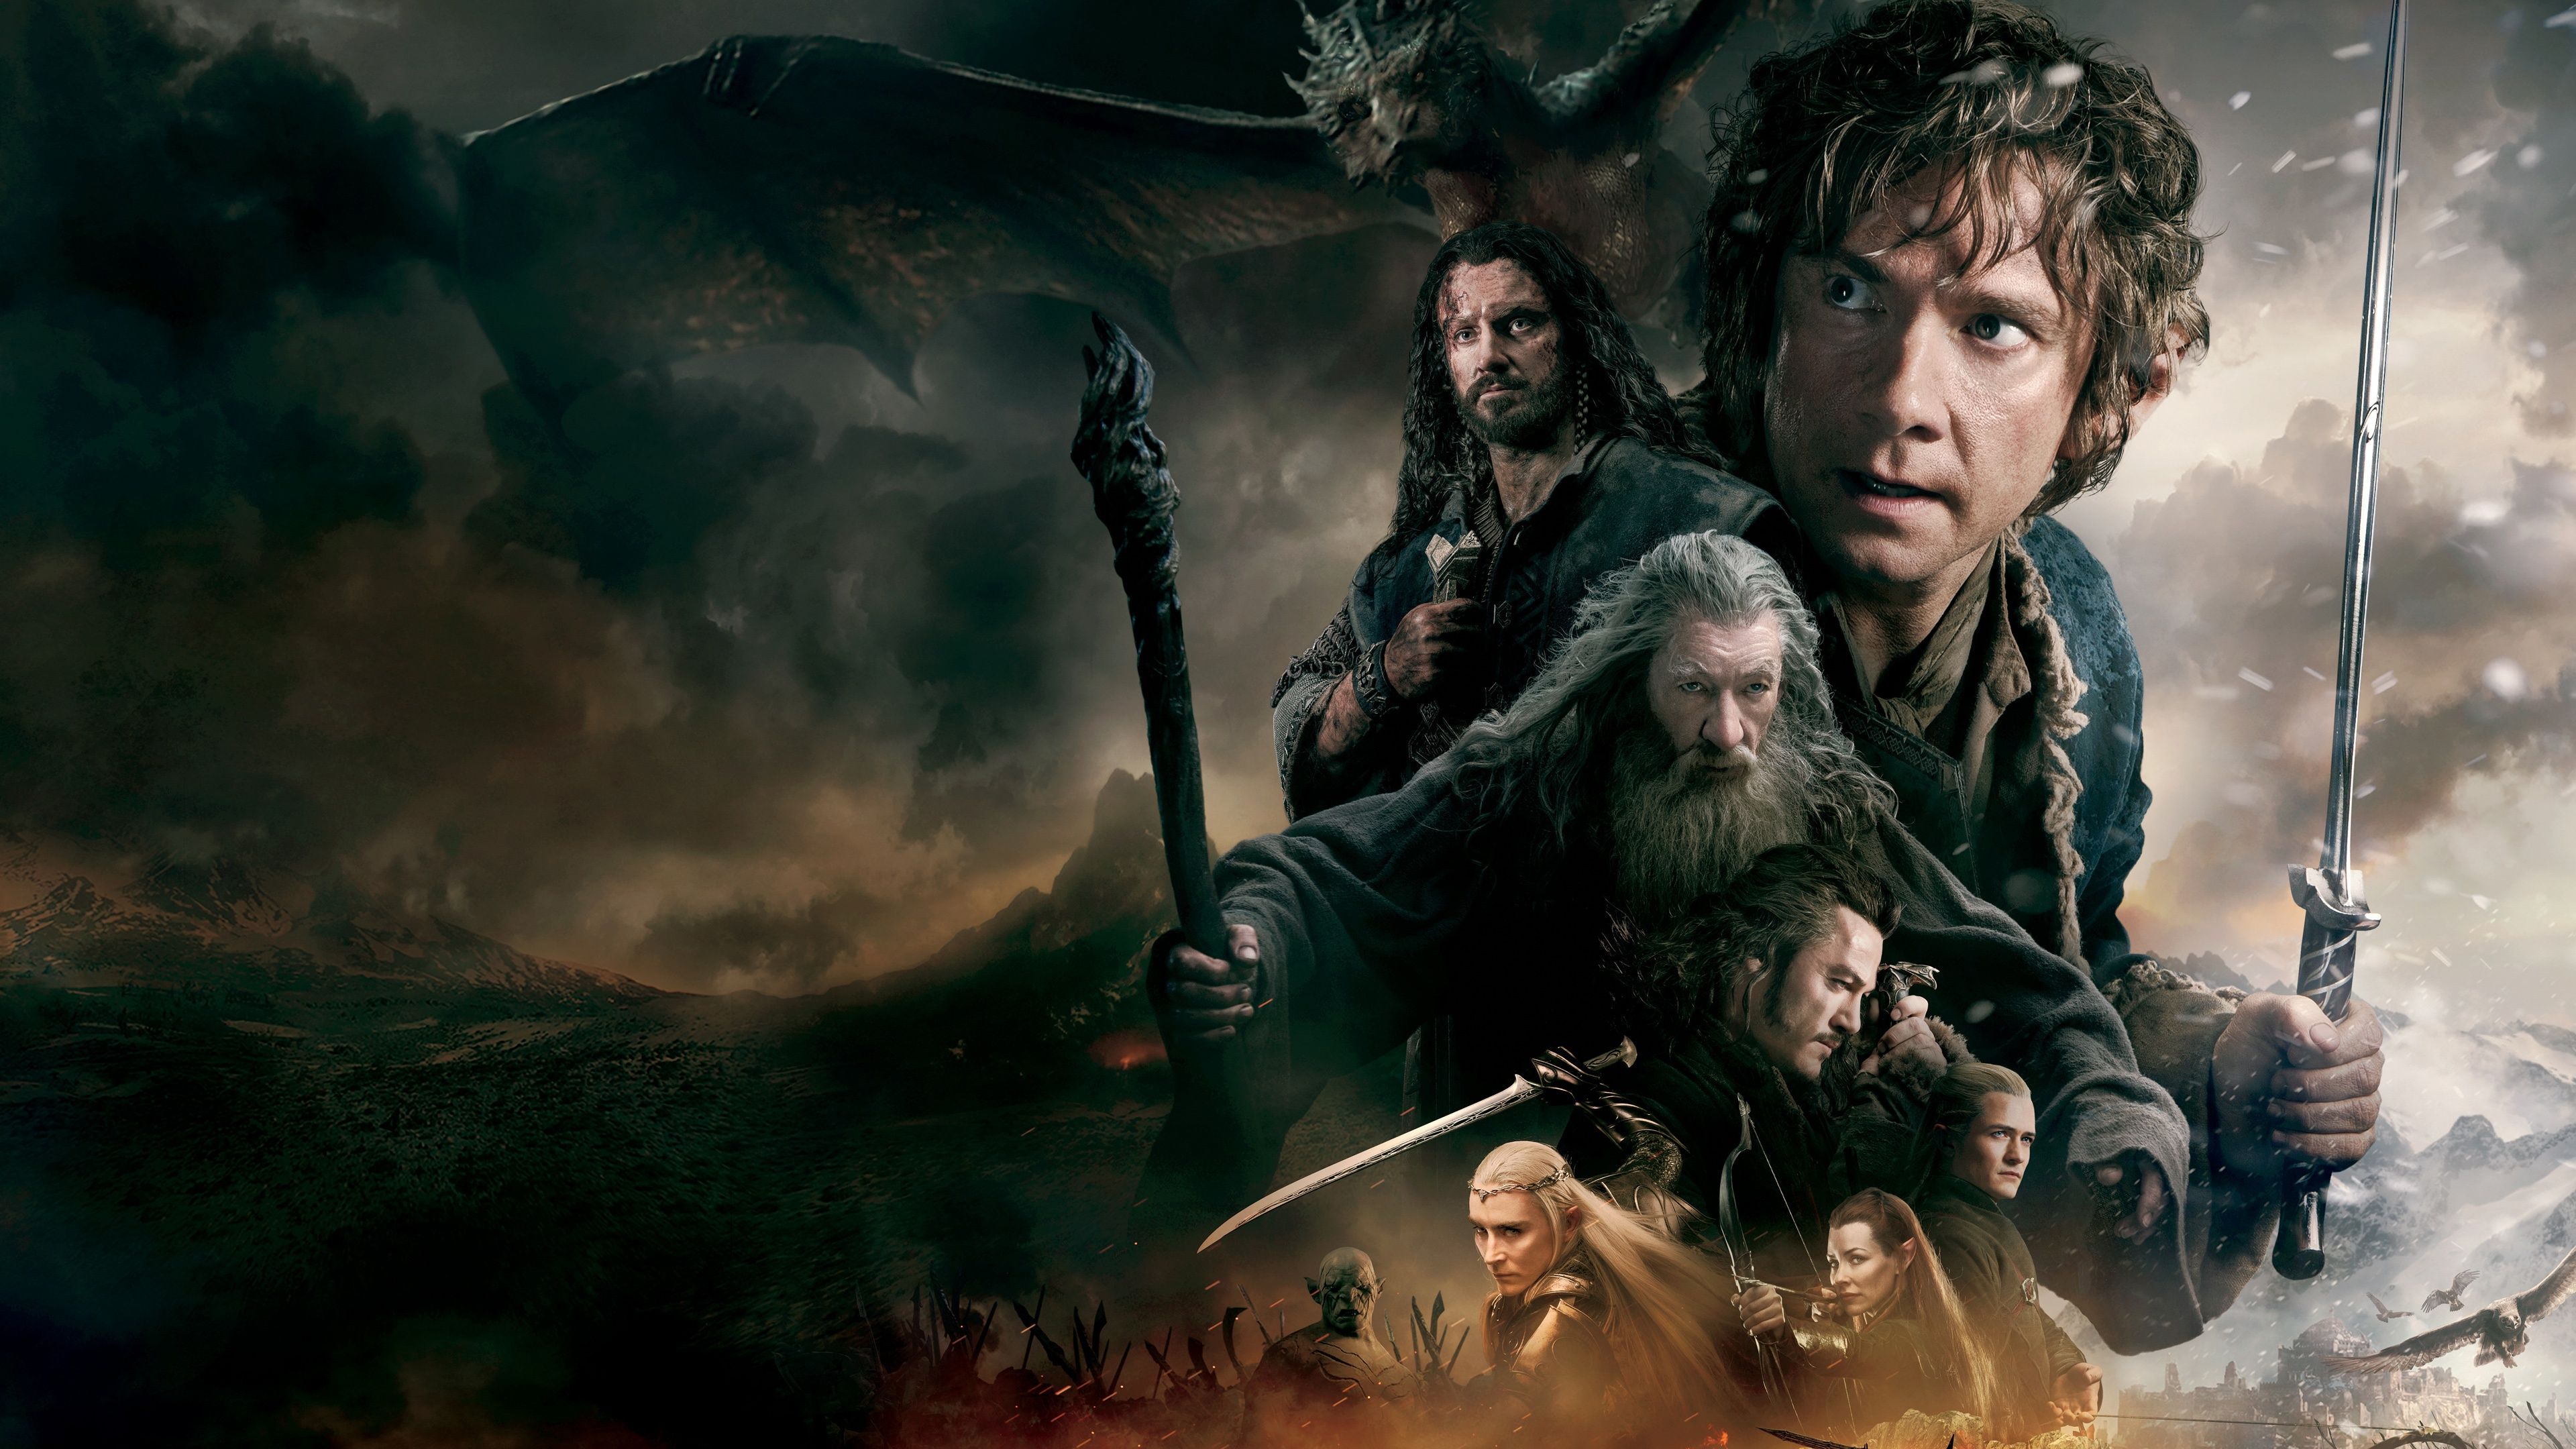 Download The Hobbit: The Battle of the Five Armies Wallpaper Full ...